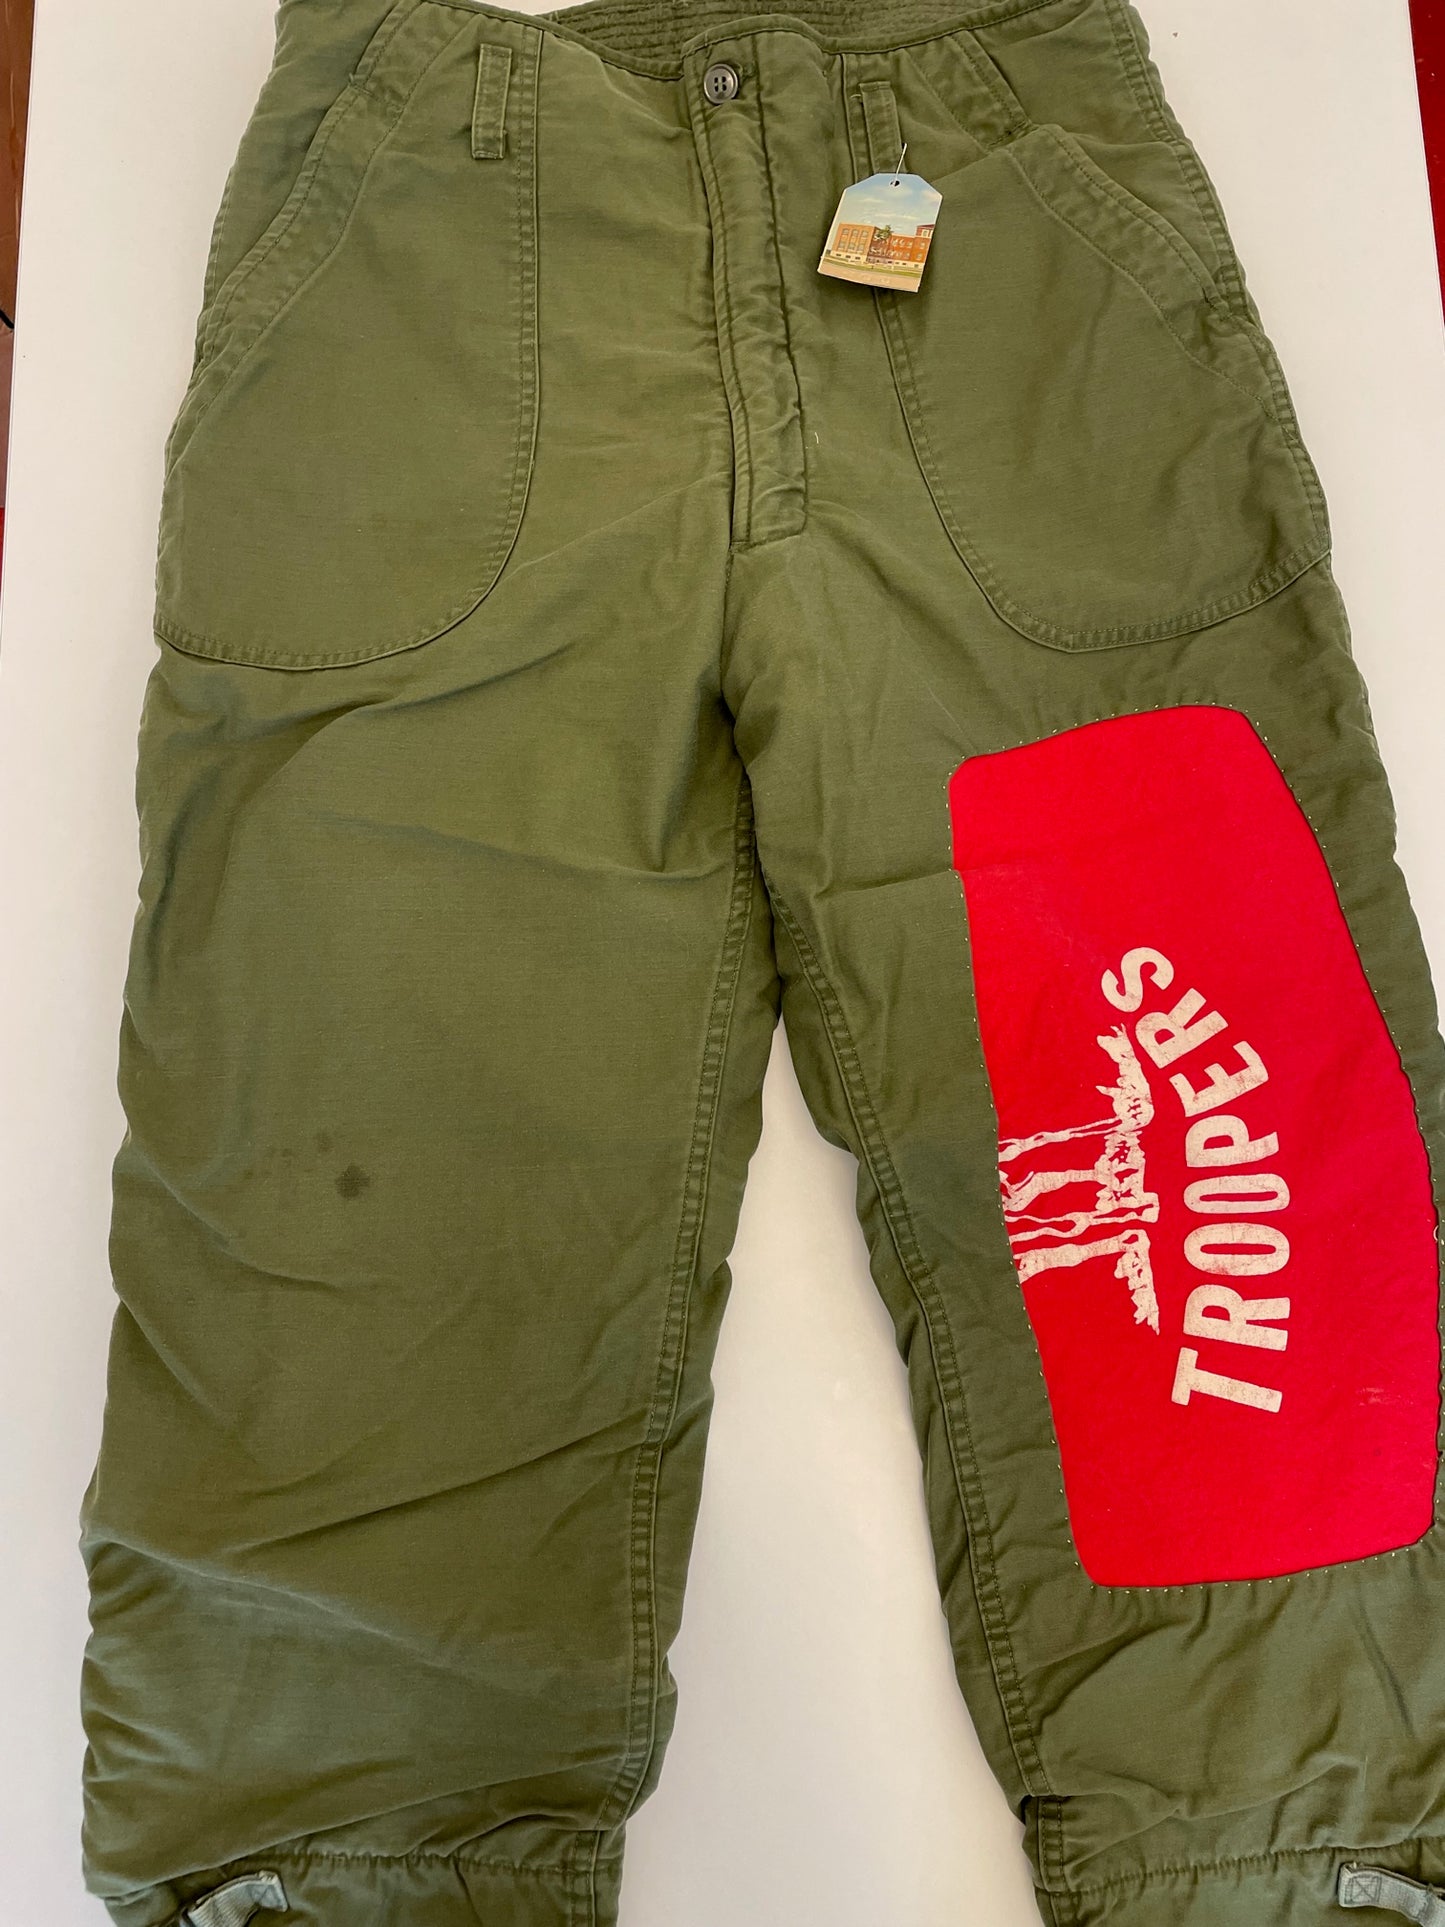 Vintage Patch Puffy Army Pants